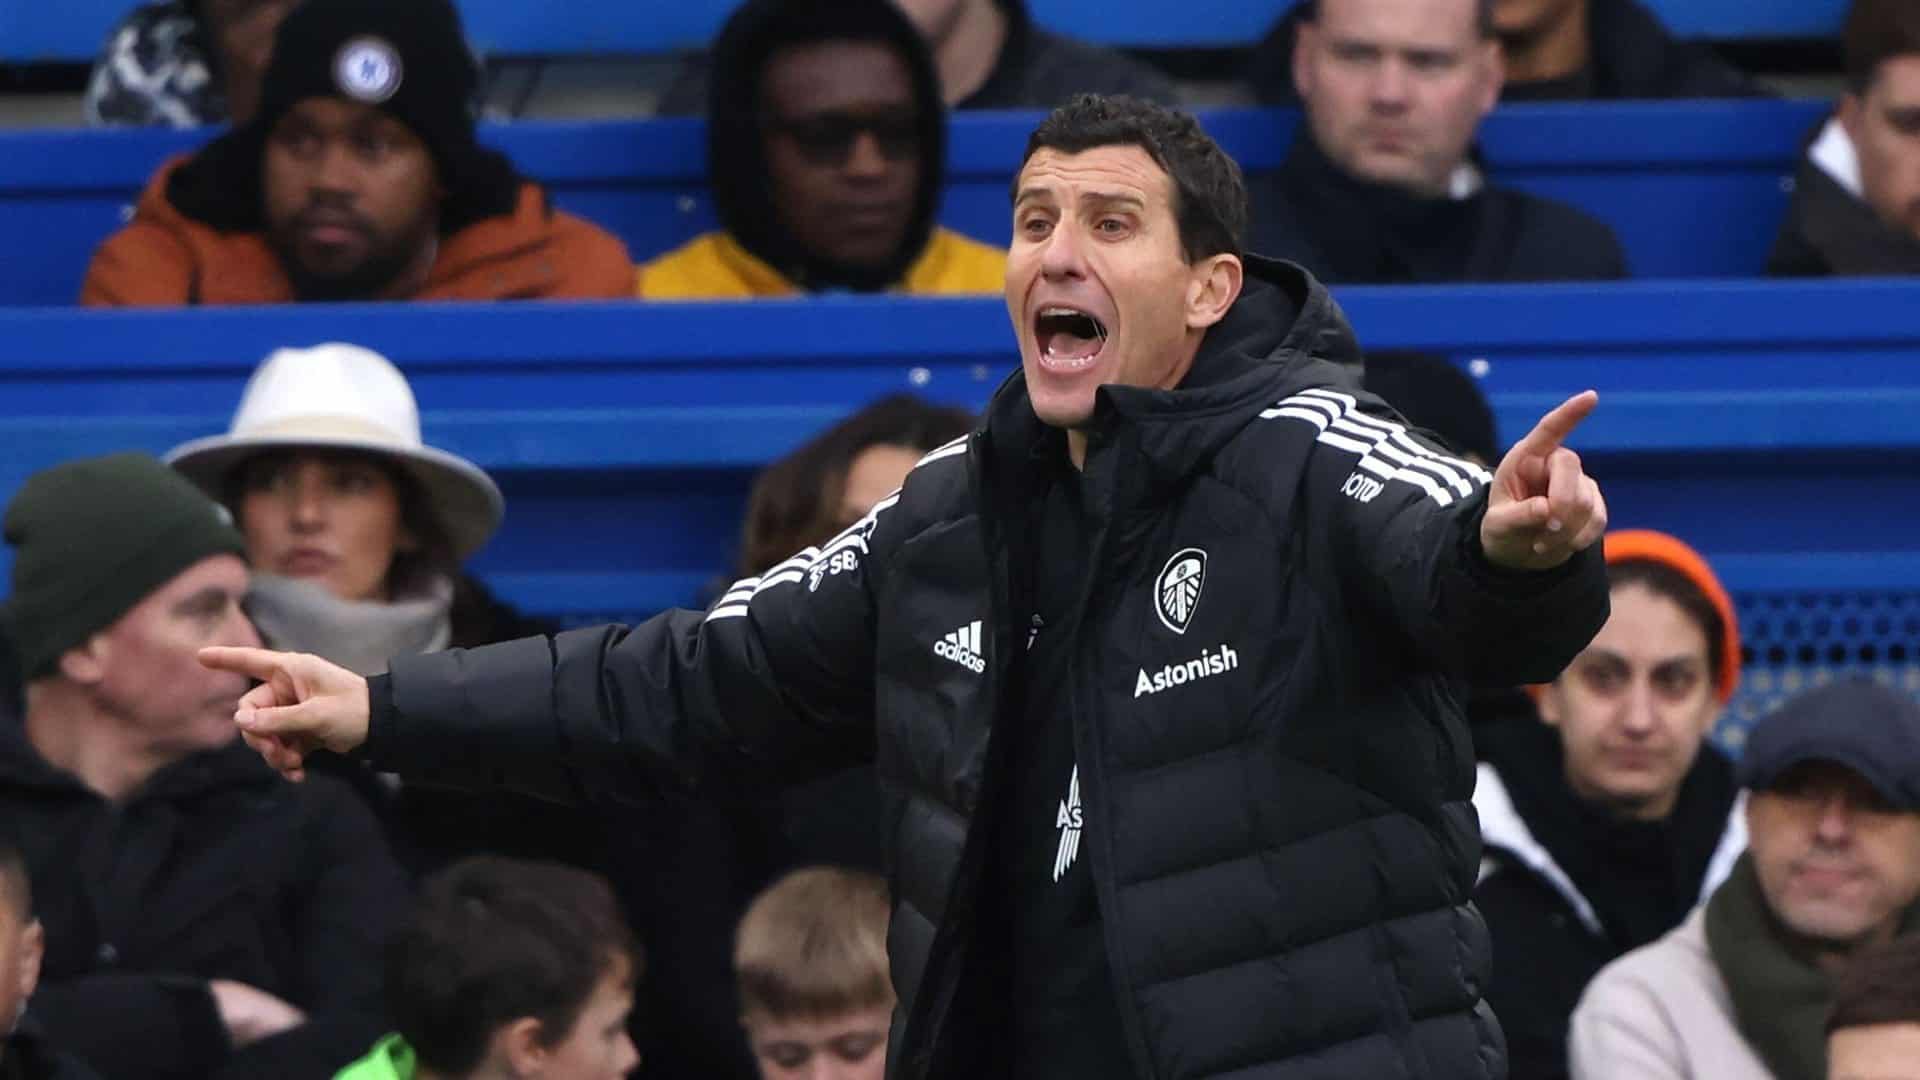 Javi Gracia at Stamford Bridge, doing some old fashioned pointing and shouting